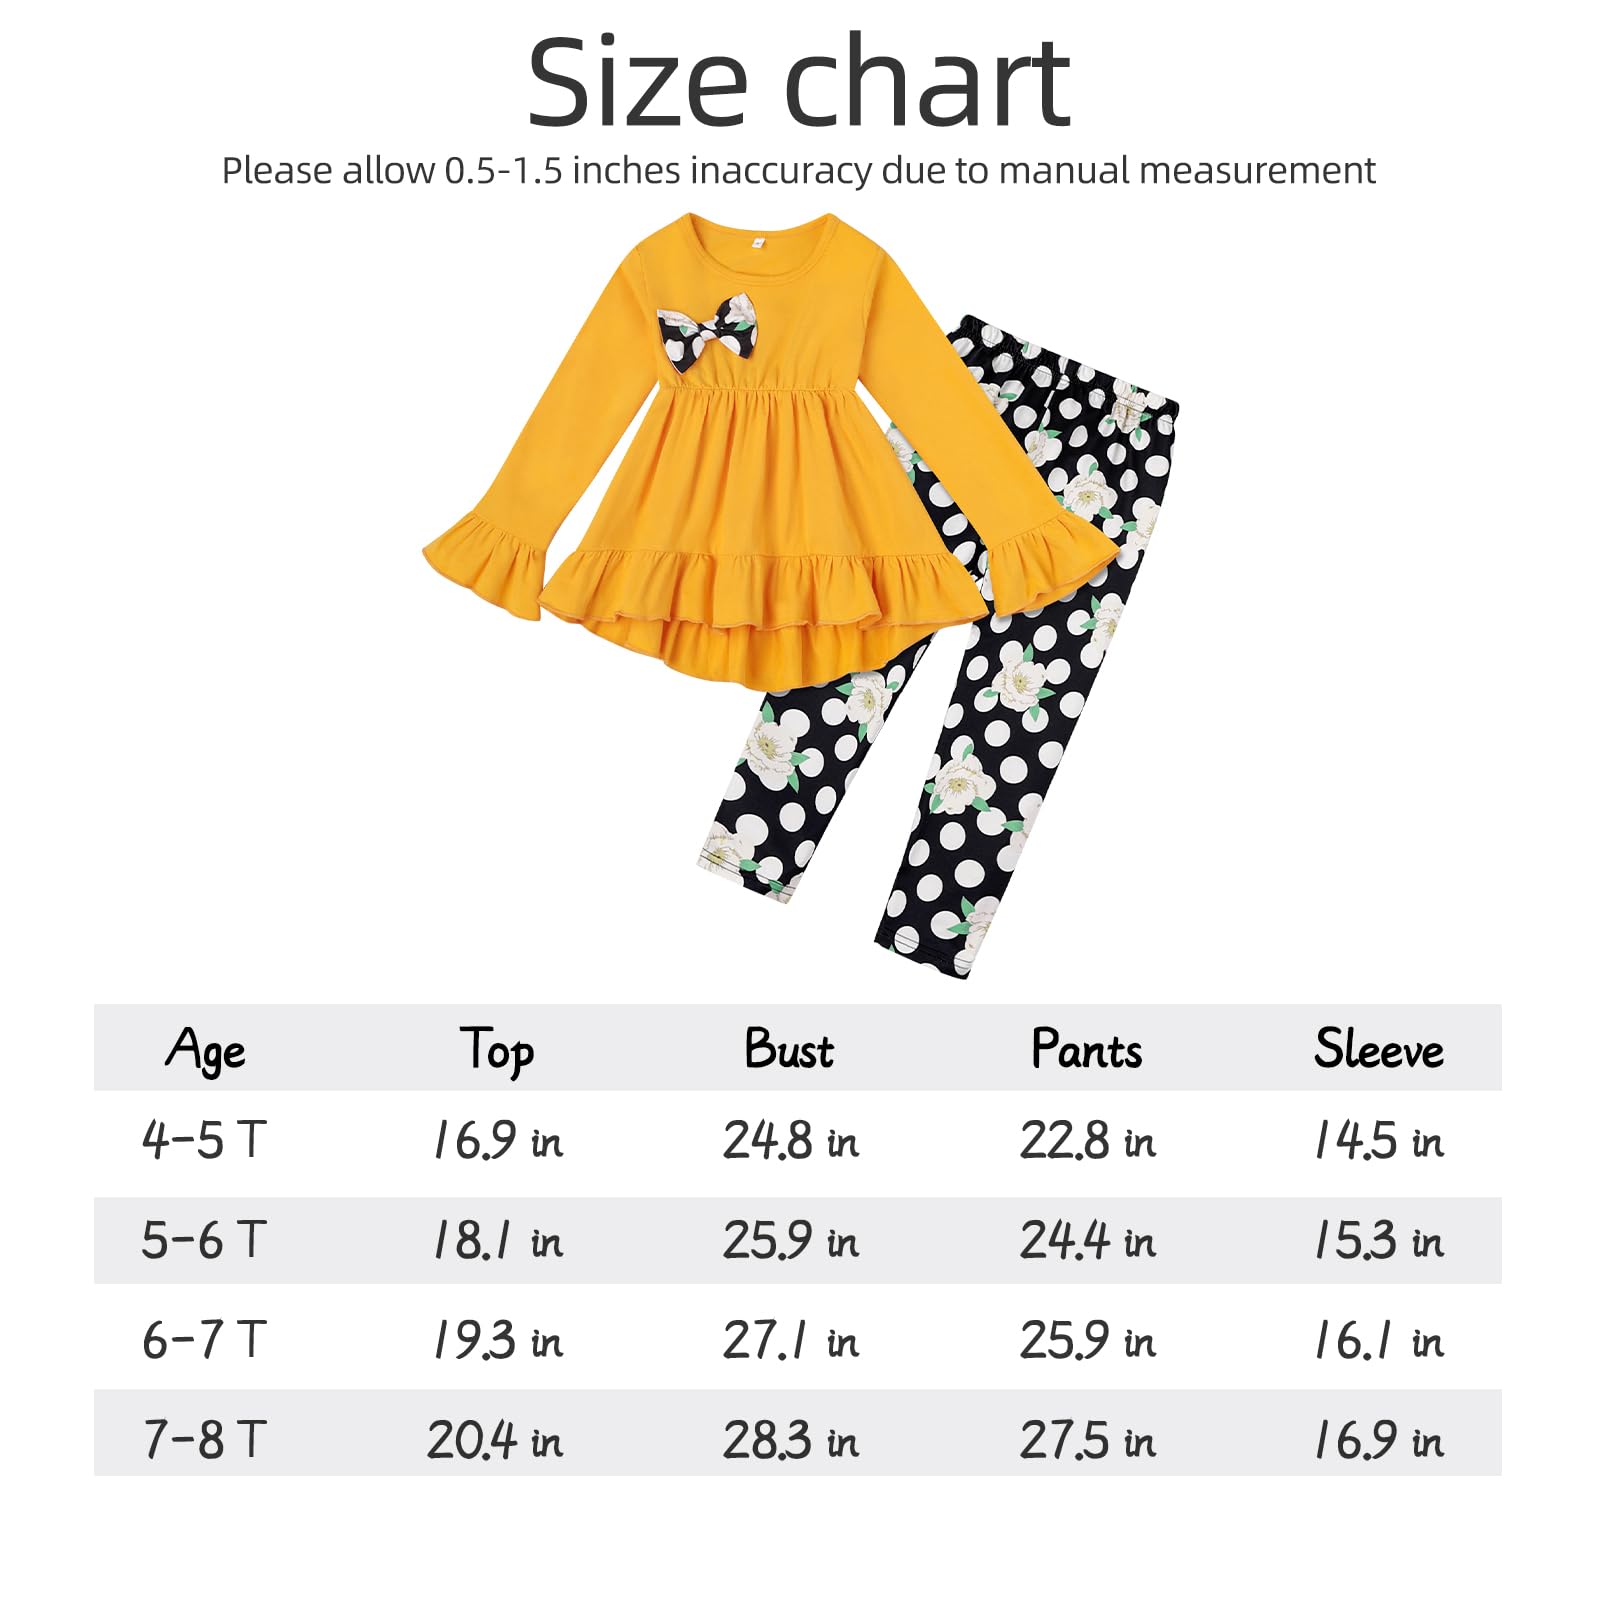 Yoxindax Toddler Girls' Clothing Bell Sleeve Ruffle High Low Bow Solid Top Floral Polka Dot Printed Leggings Autumn/Winter Suit(7-8t)